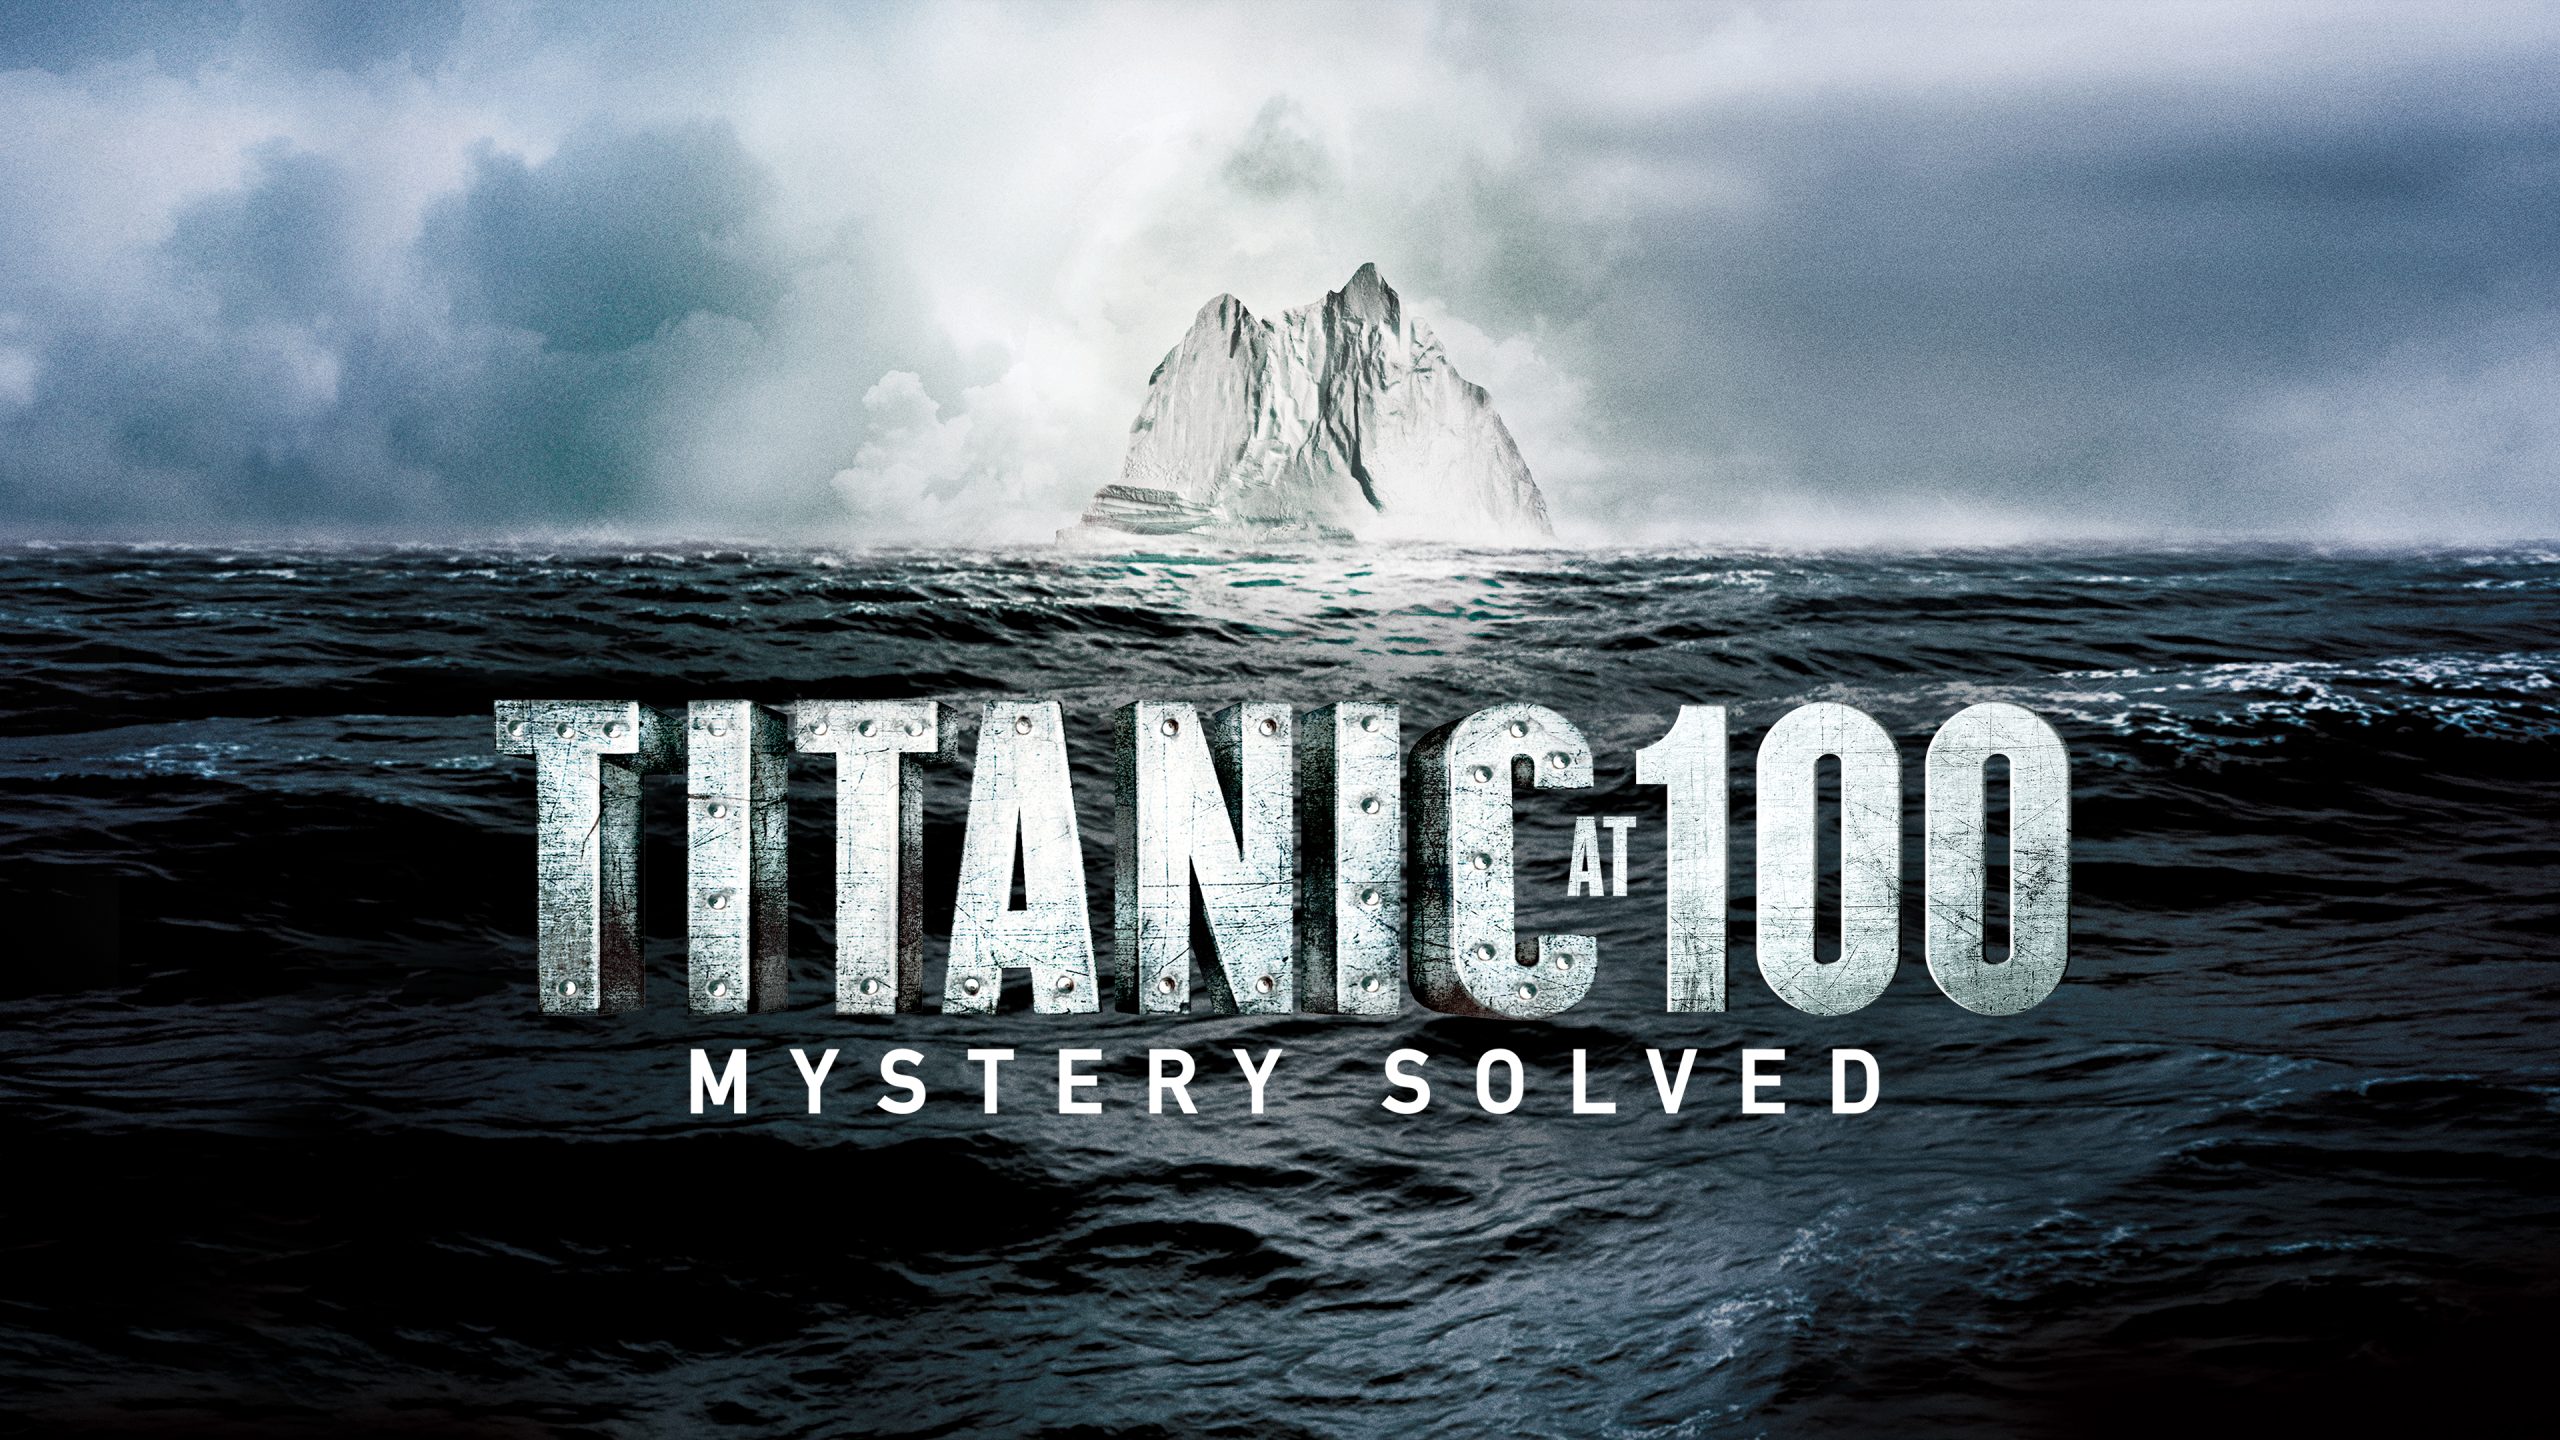 Titanic at 100: Mystery Solved